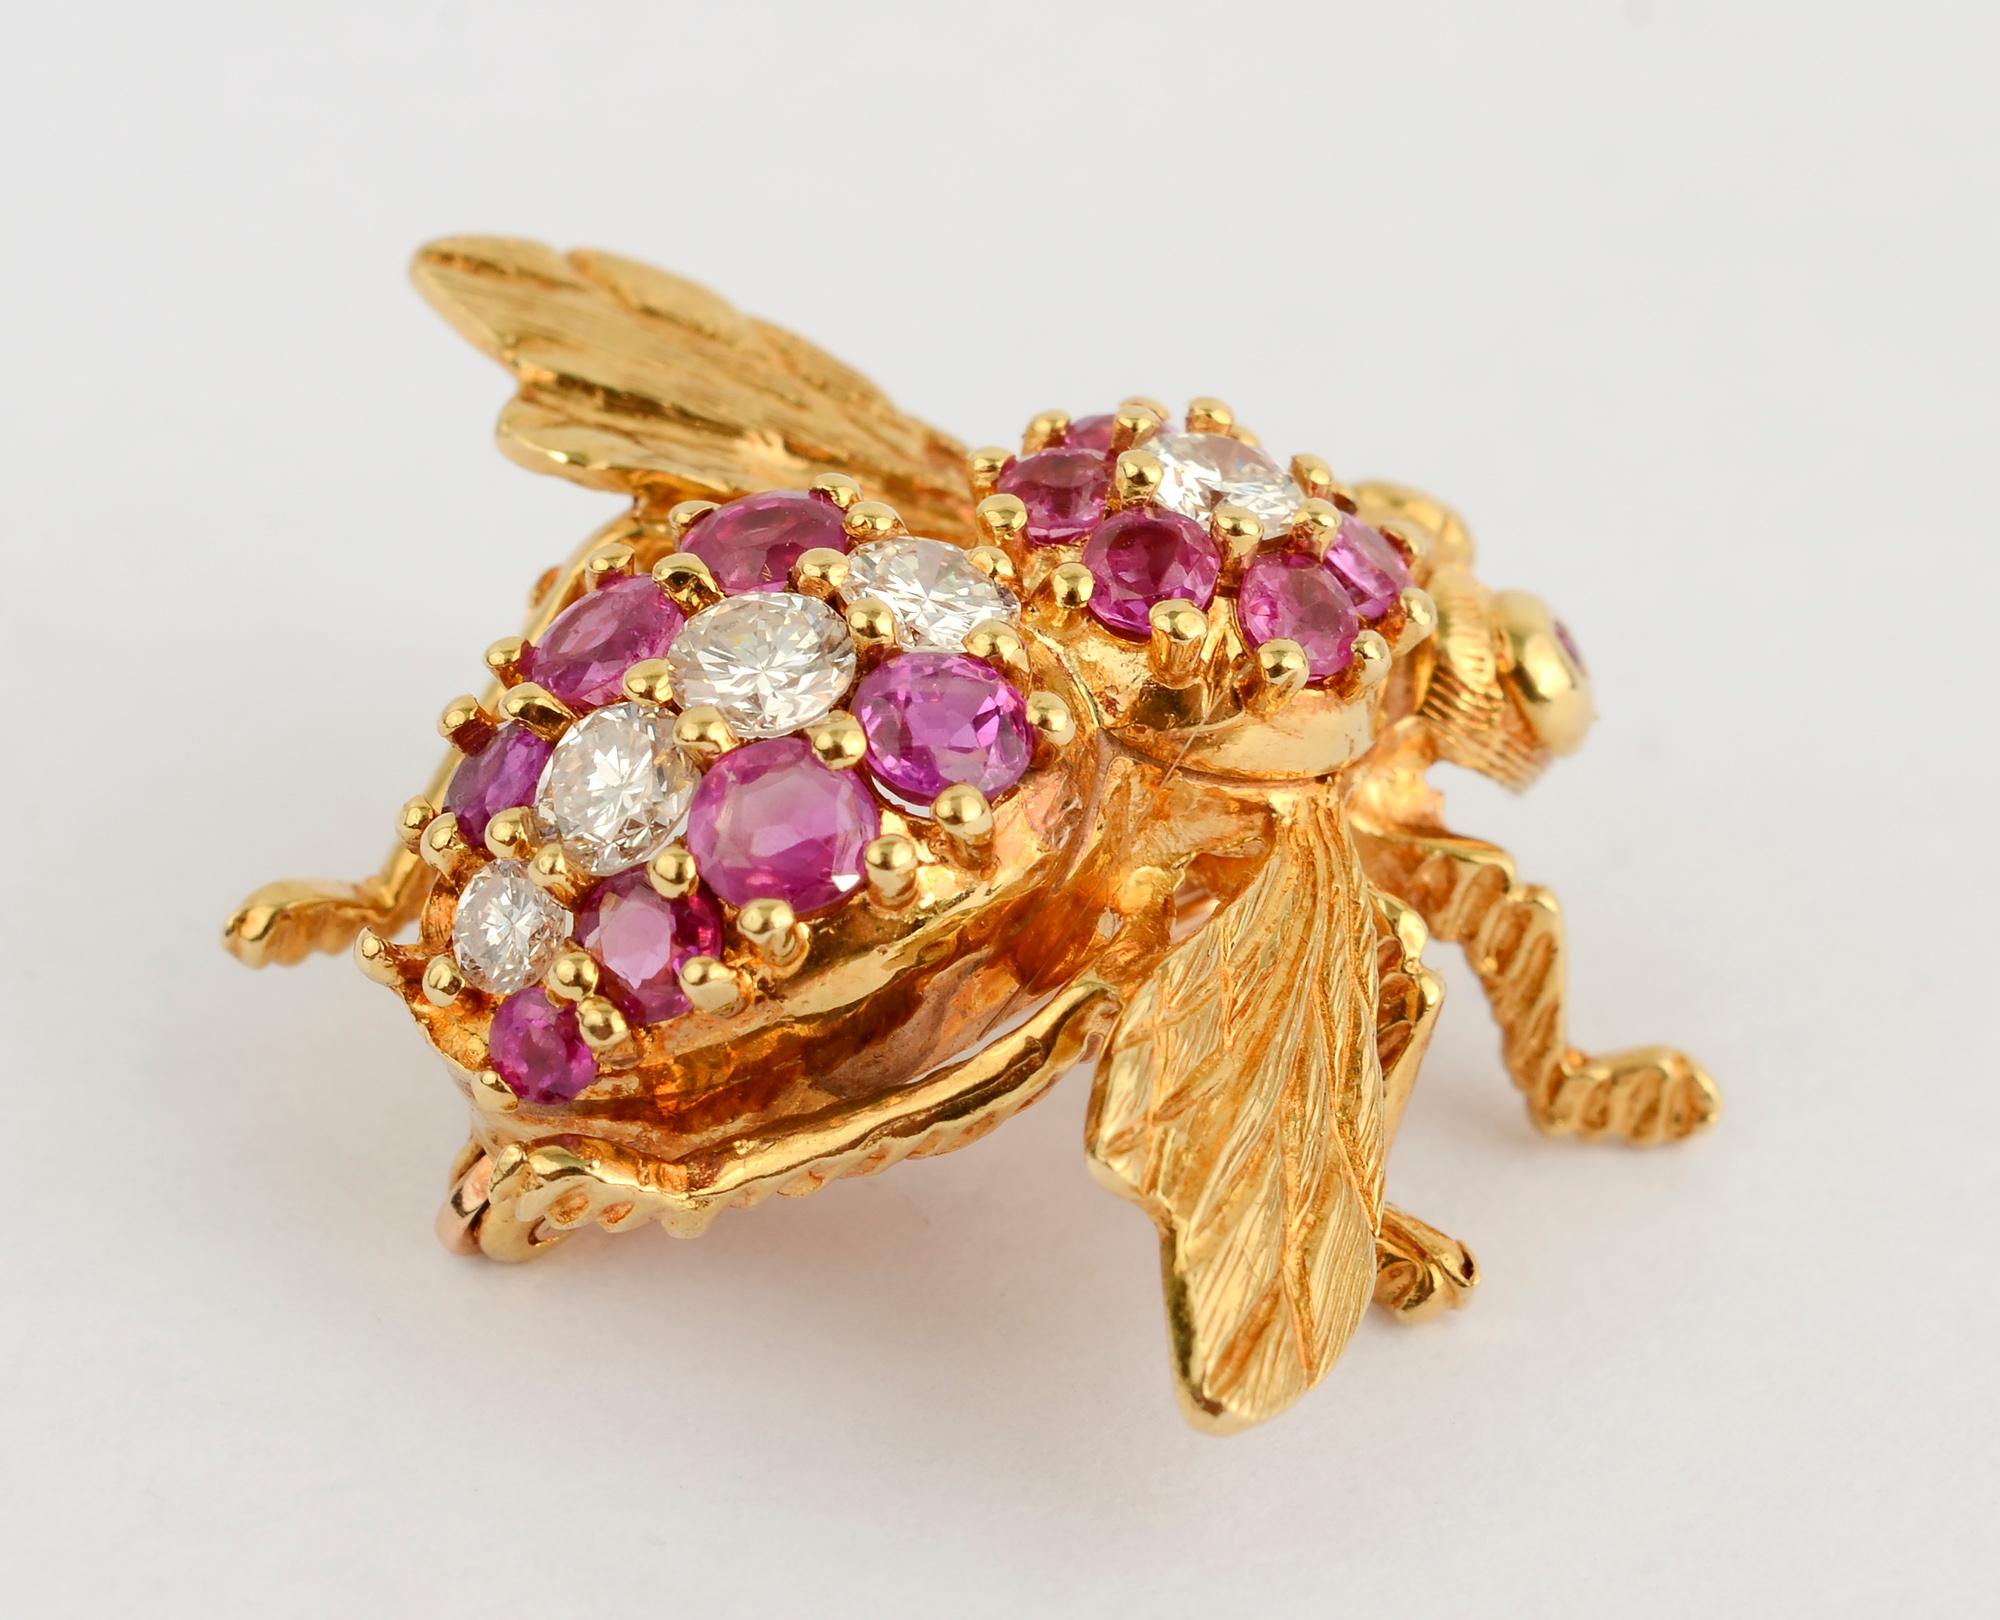 Elegant bee brooch with rubies and diamonds. The five diamonds are graduated in size with the largest measuring 1/4 carat. The eyes are rubies.
The 18 karat brooch is signed HR but I am not familiar with the maker.